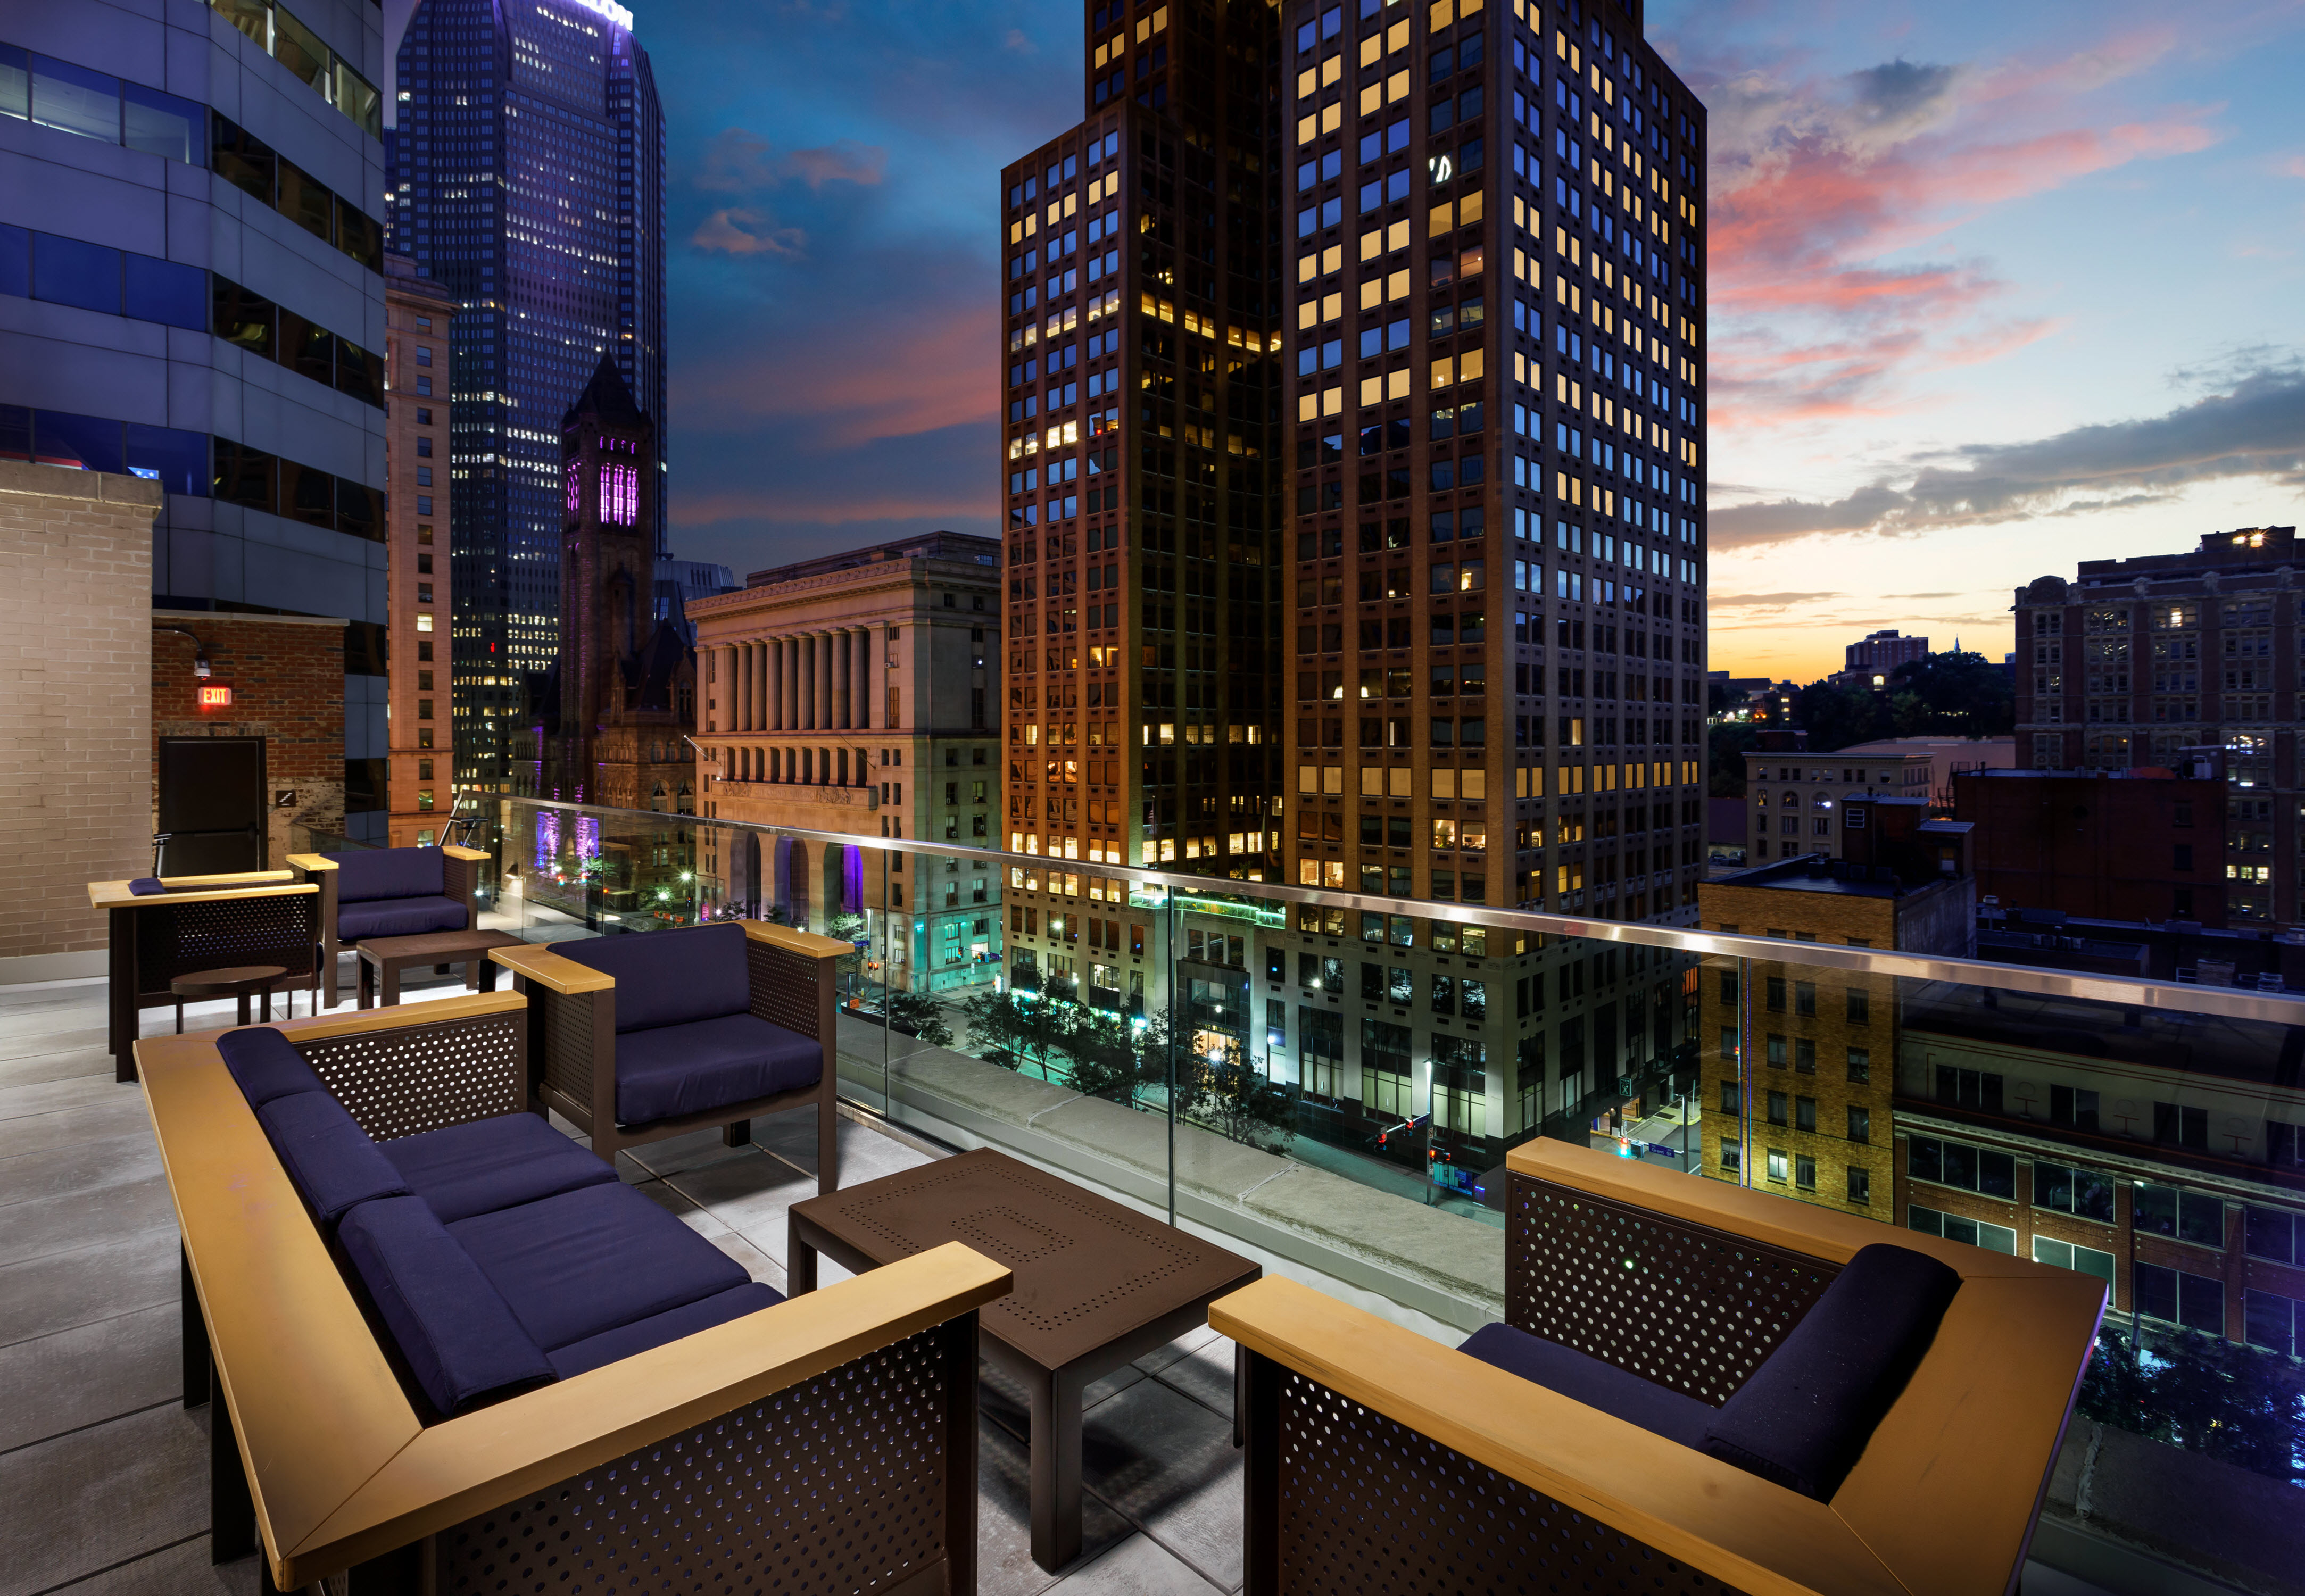 Hotel Rooftop Terrace Seating Area with Armchairs, Sofa and Coffee Table at Dusk